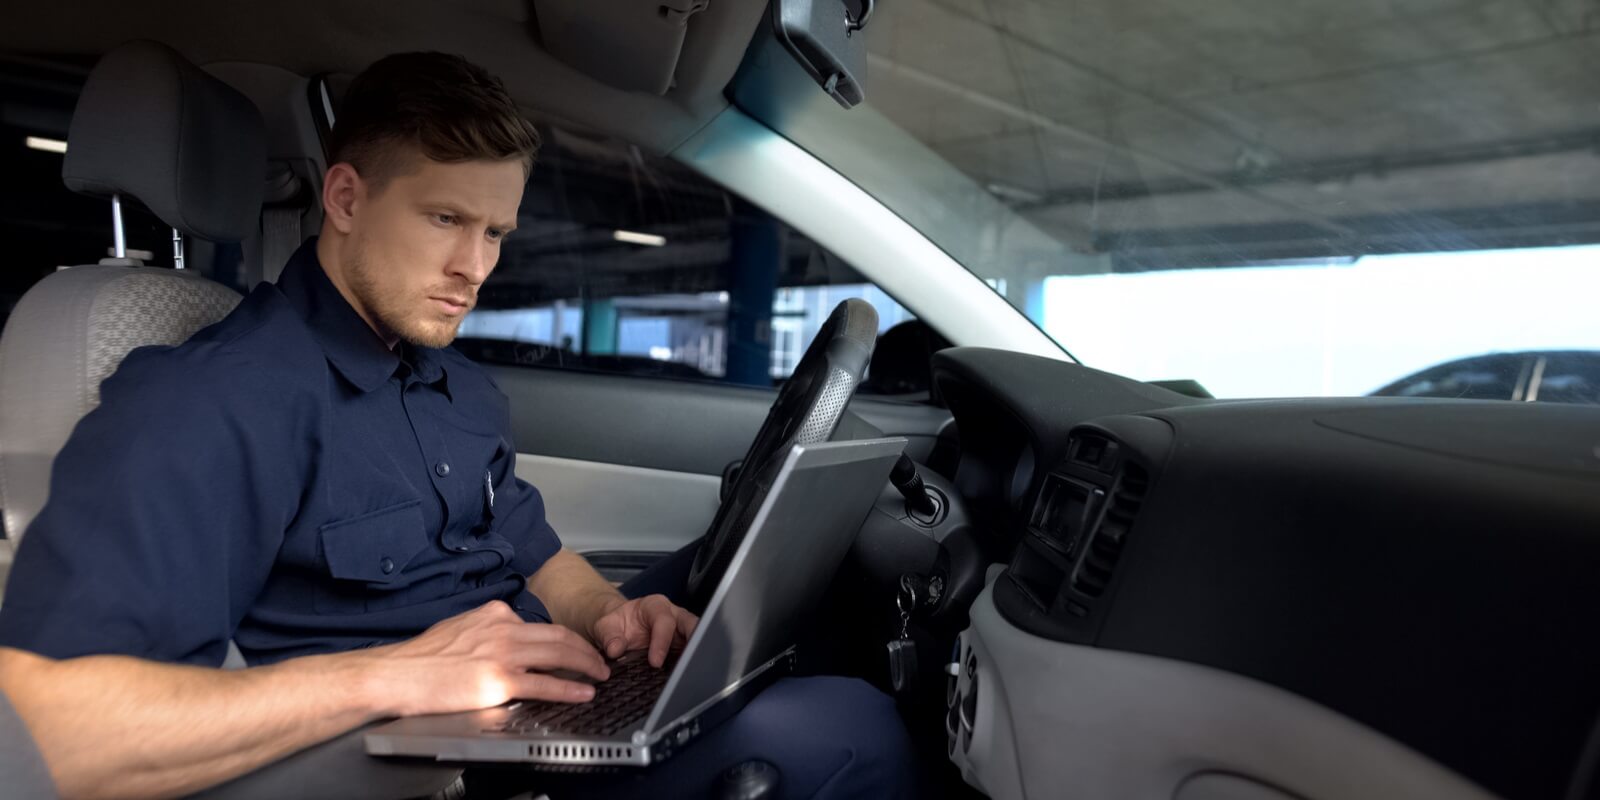 police officer on computer